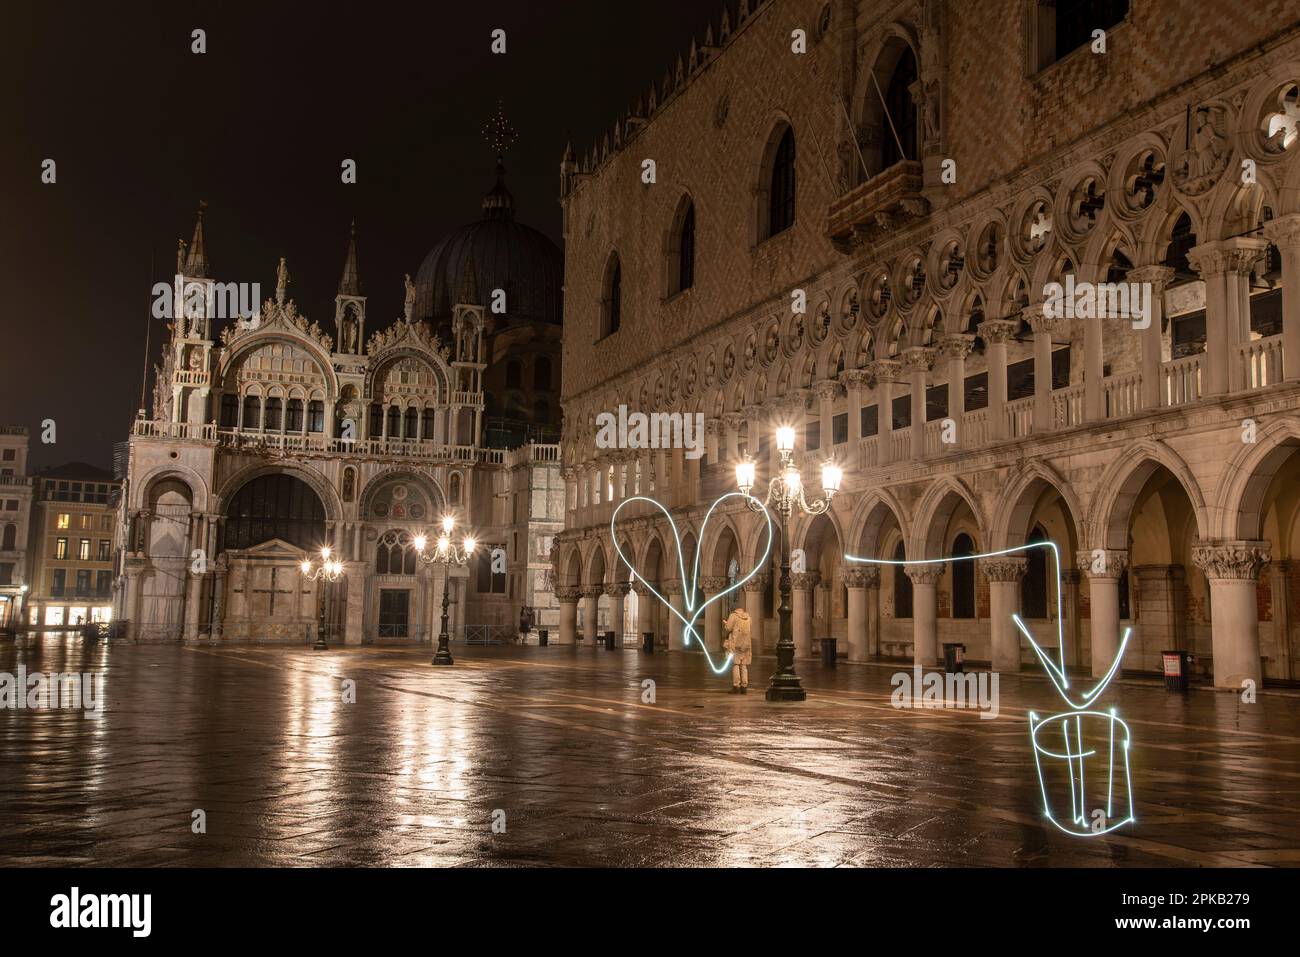 Writing with Light in front of the Illuminated Doge Palace on the Marks Square at Night, Venice, Italy Stock Photo